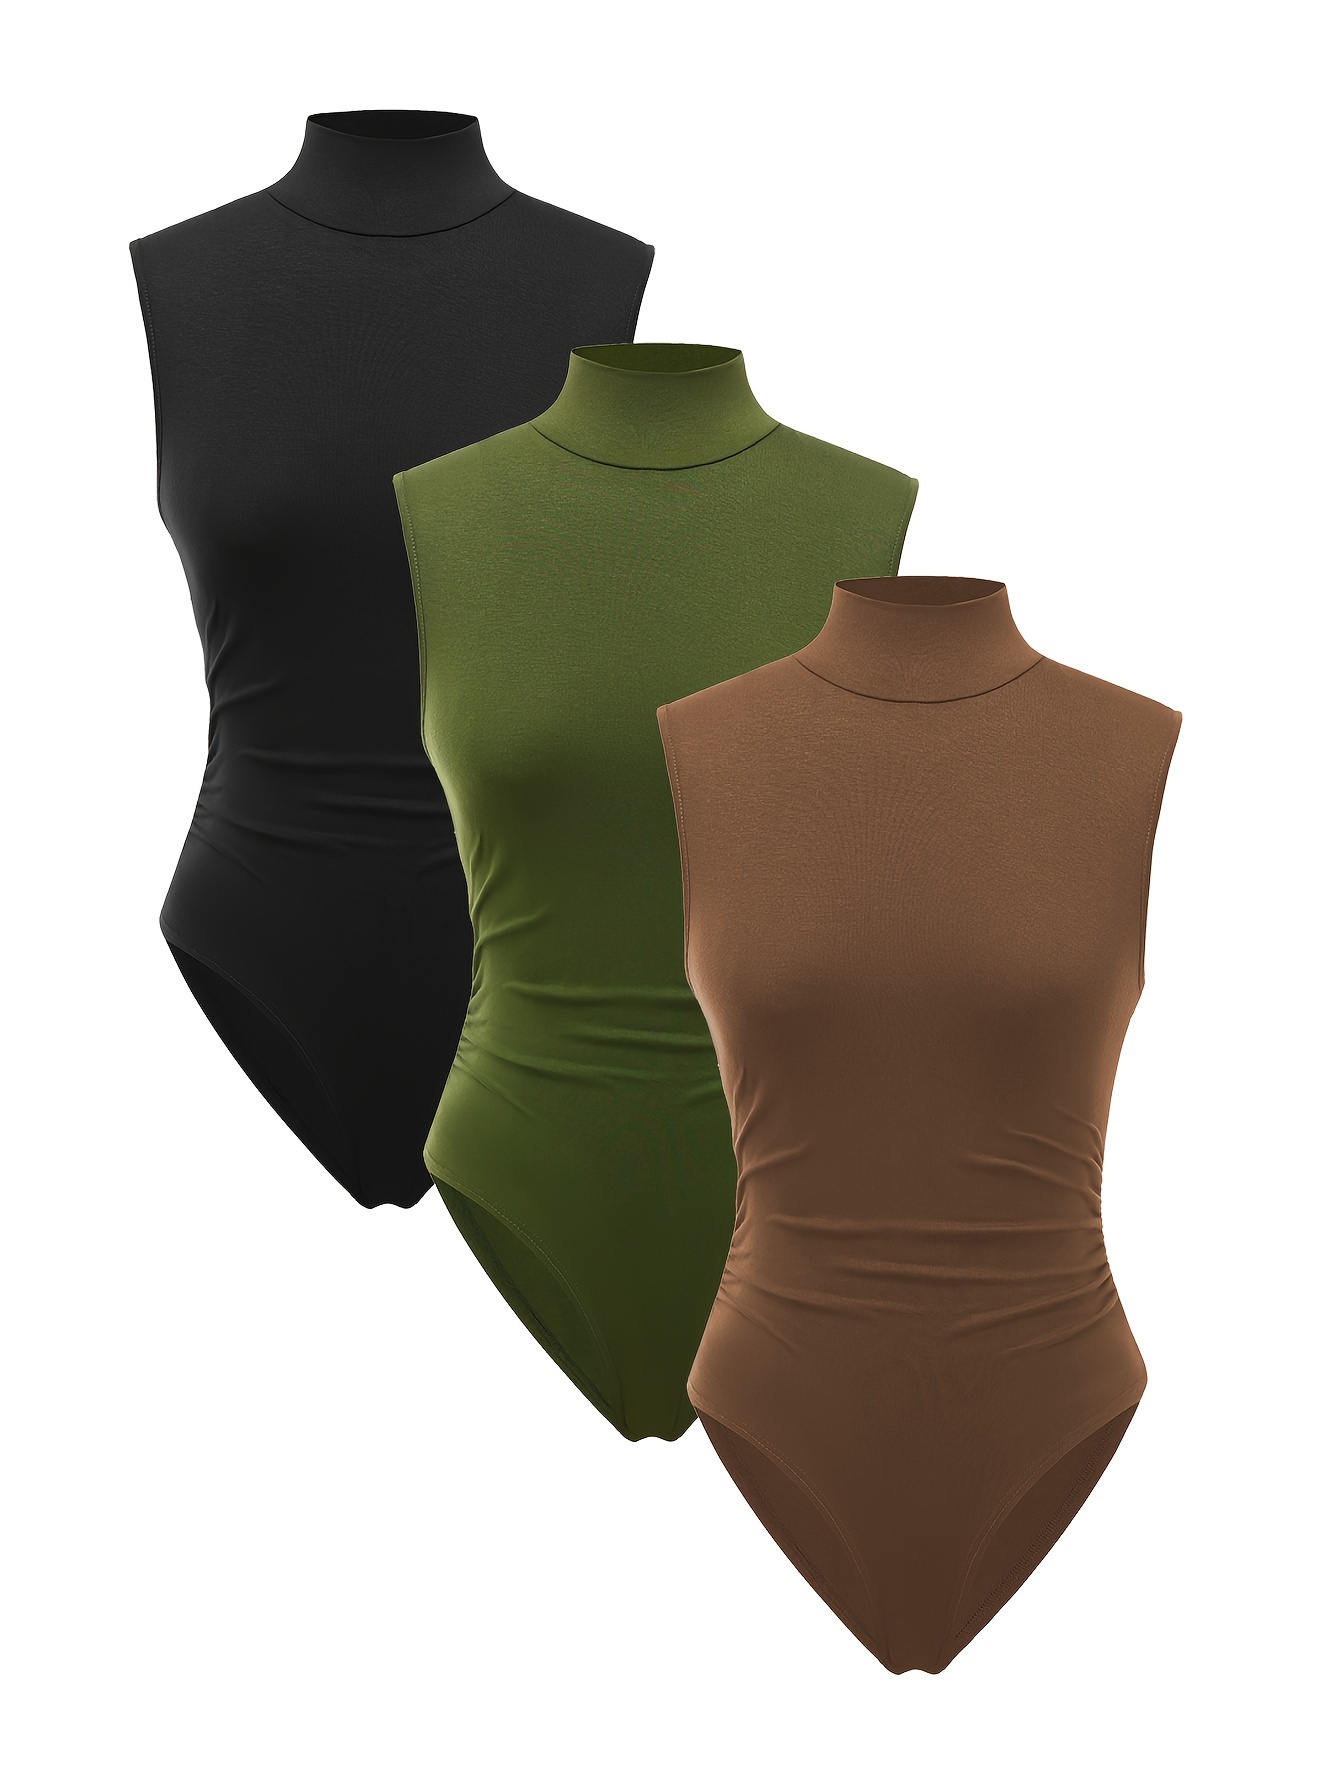 3 Packs Solid Color Turtle Neck Bodysuit, Casual Sleeveless Slim * Bodysuit  For Every Day, Women's Clothing